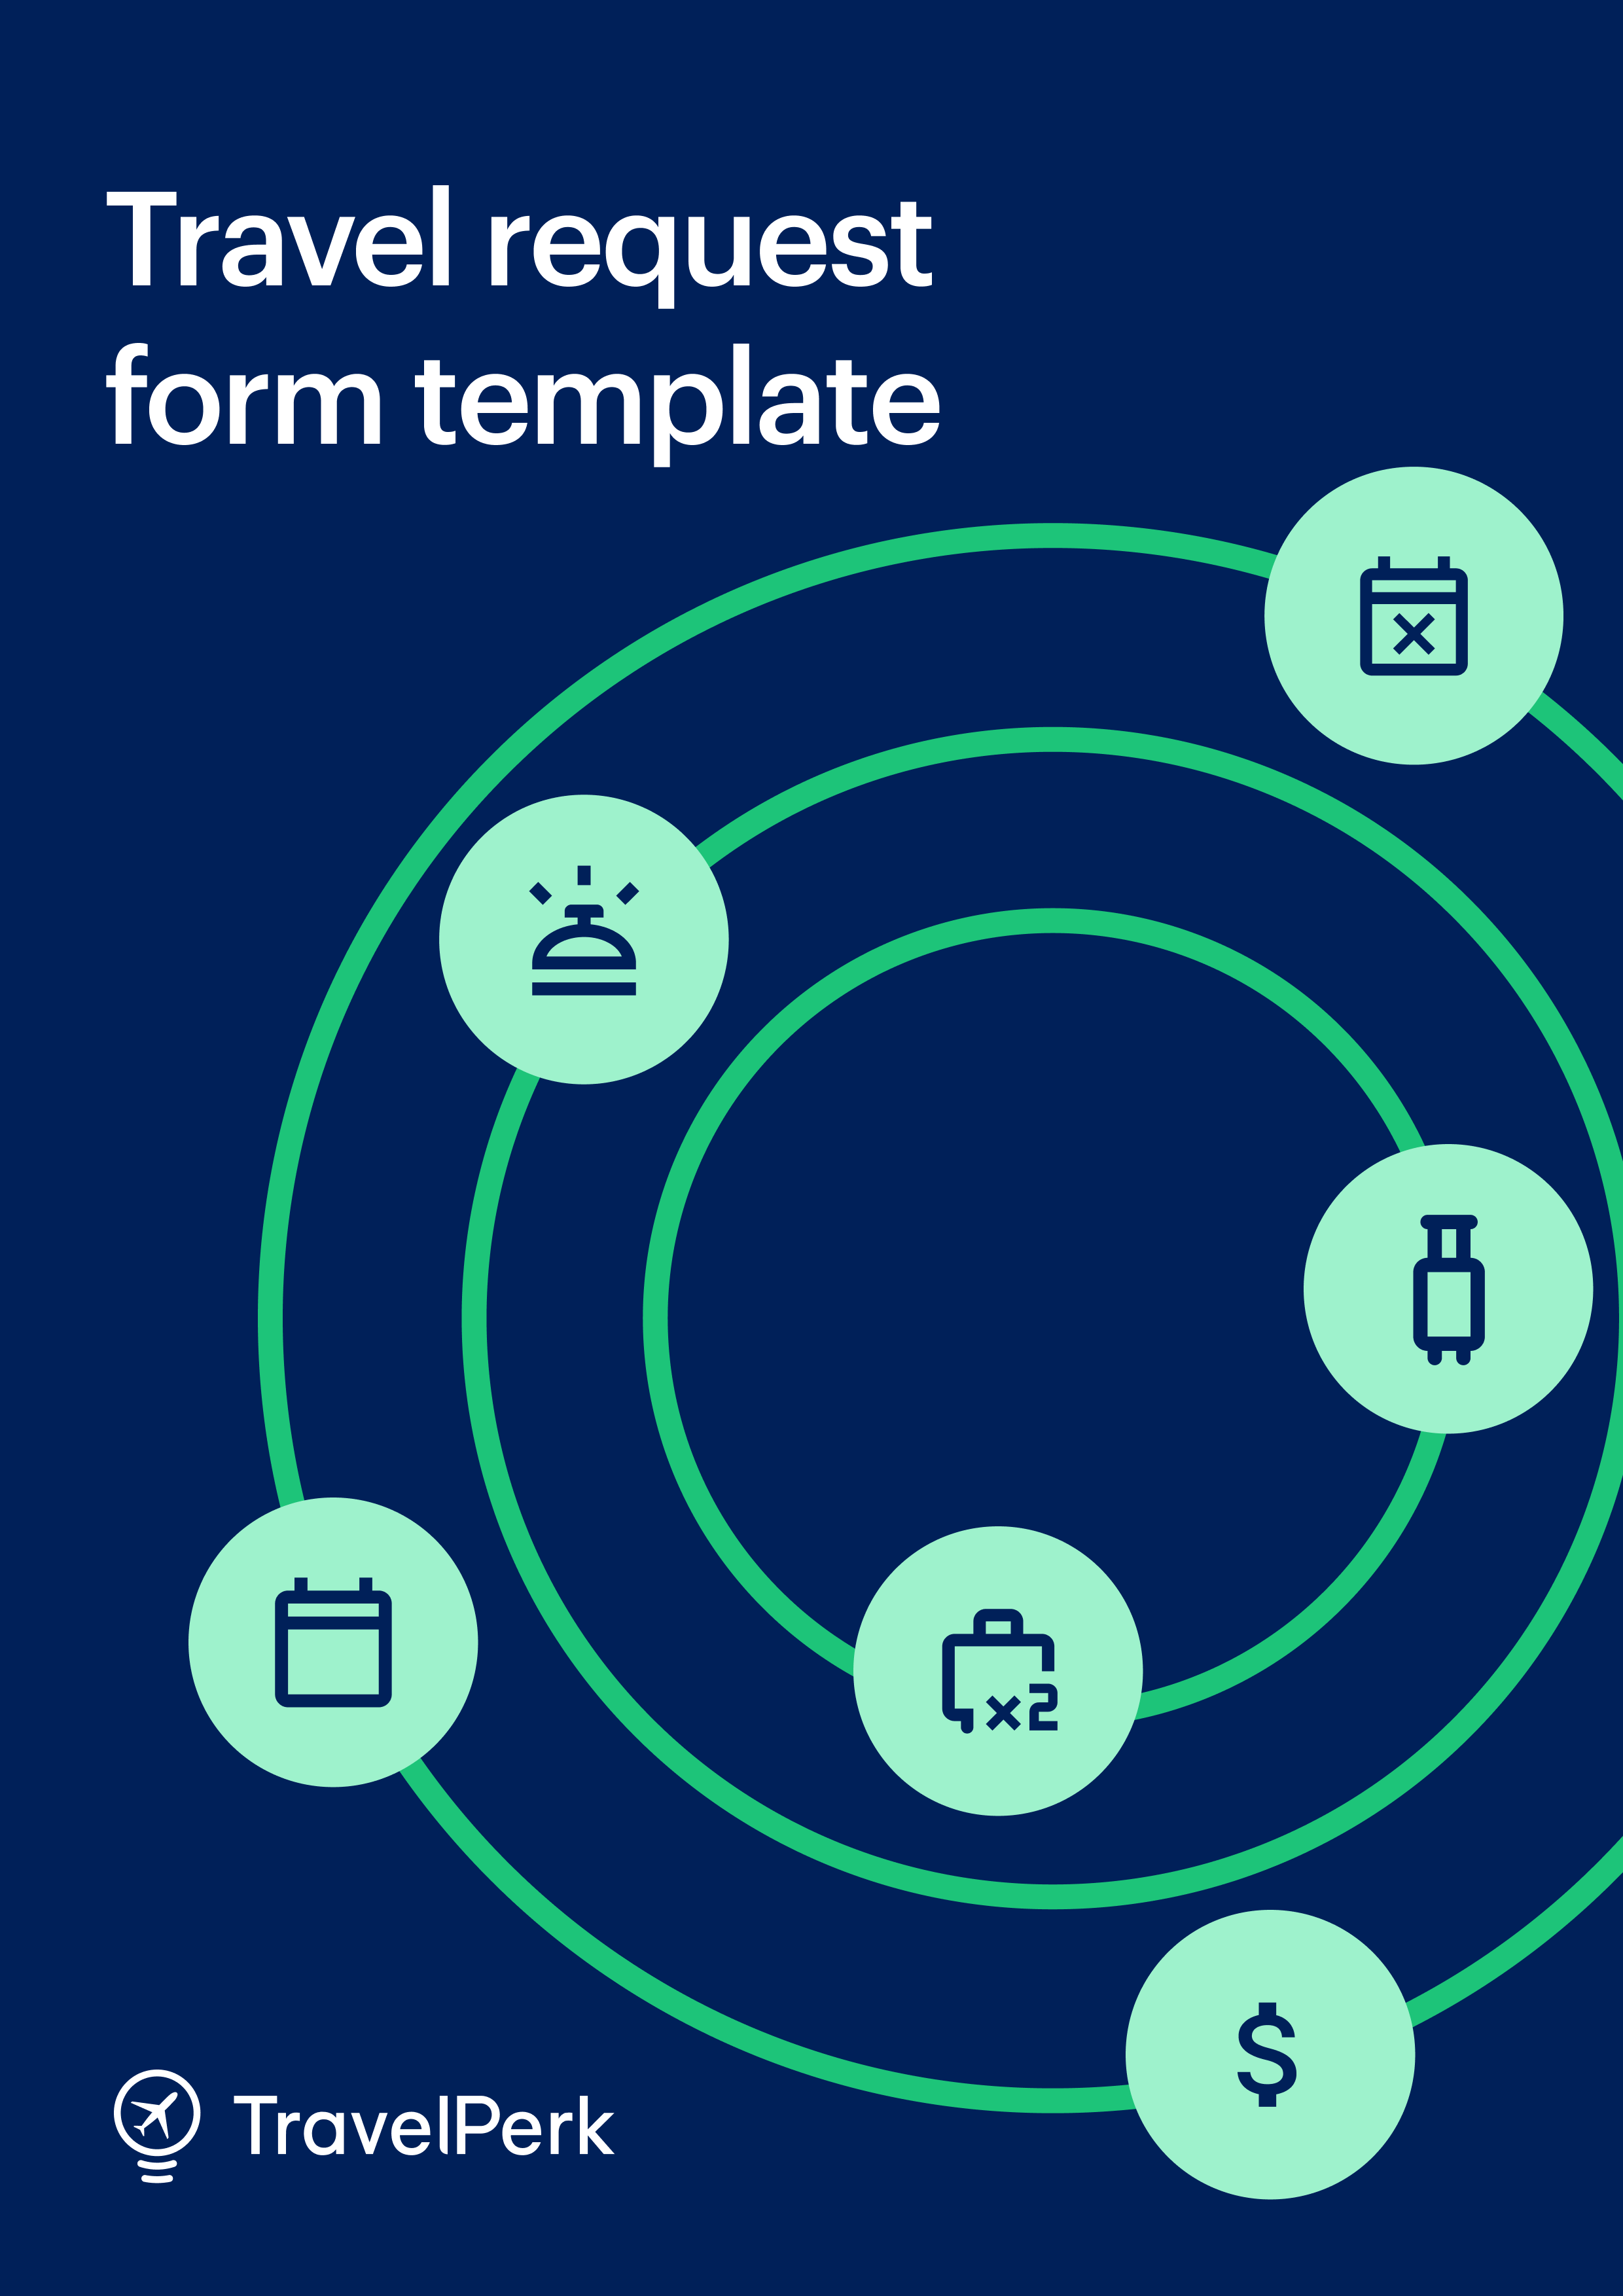 Travel request form template